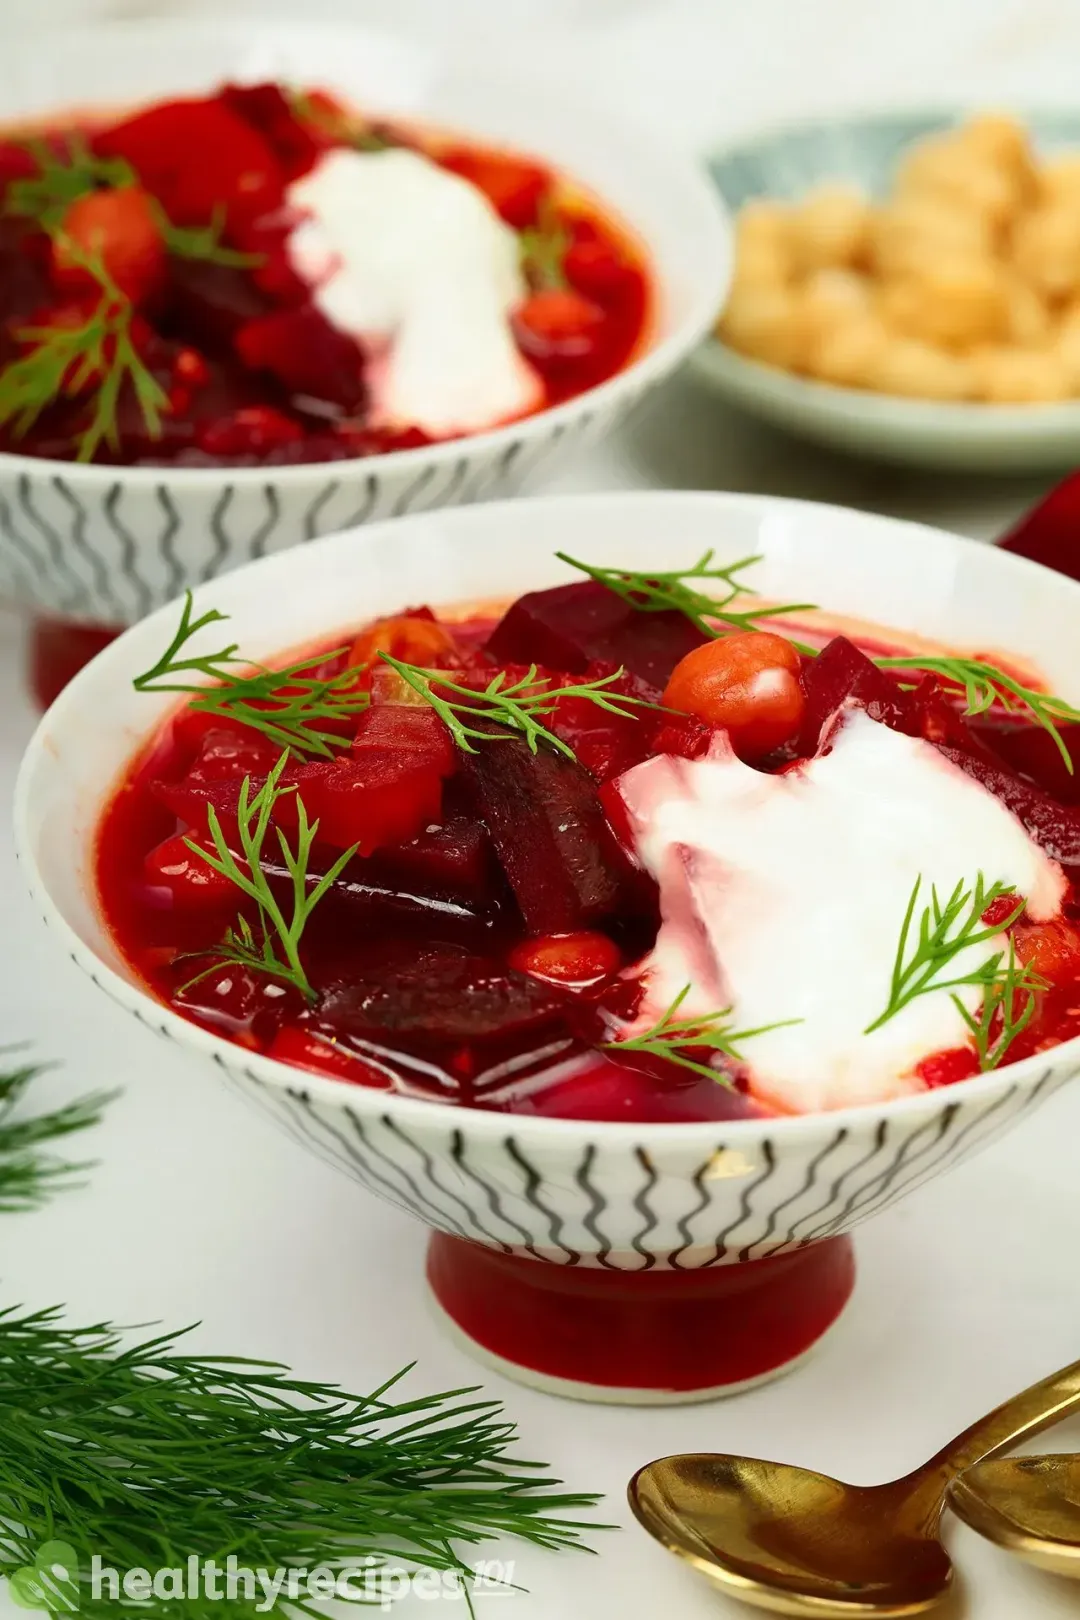 What Type of Broth Can You Use for Beet Soup